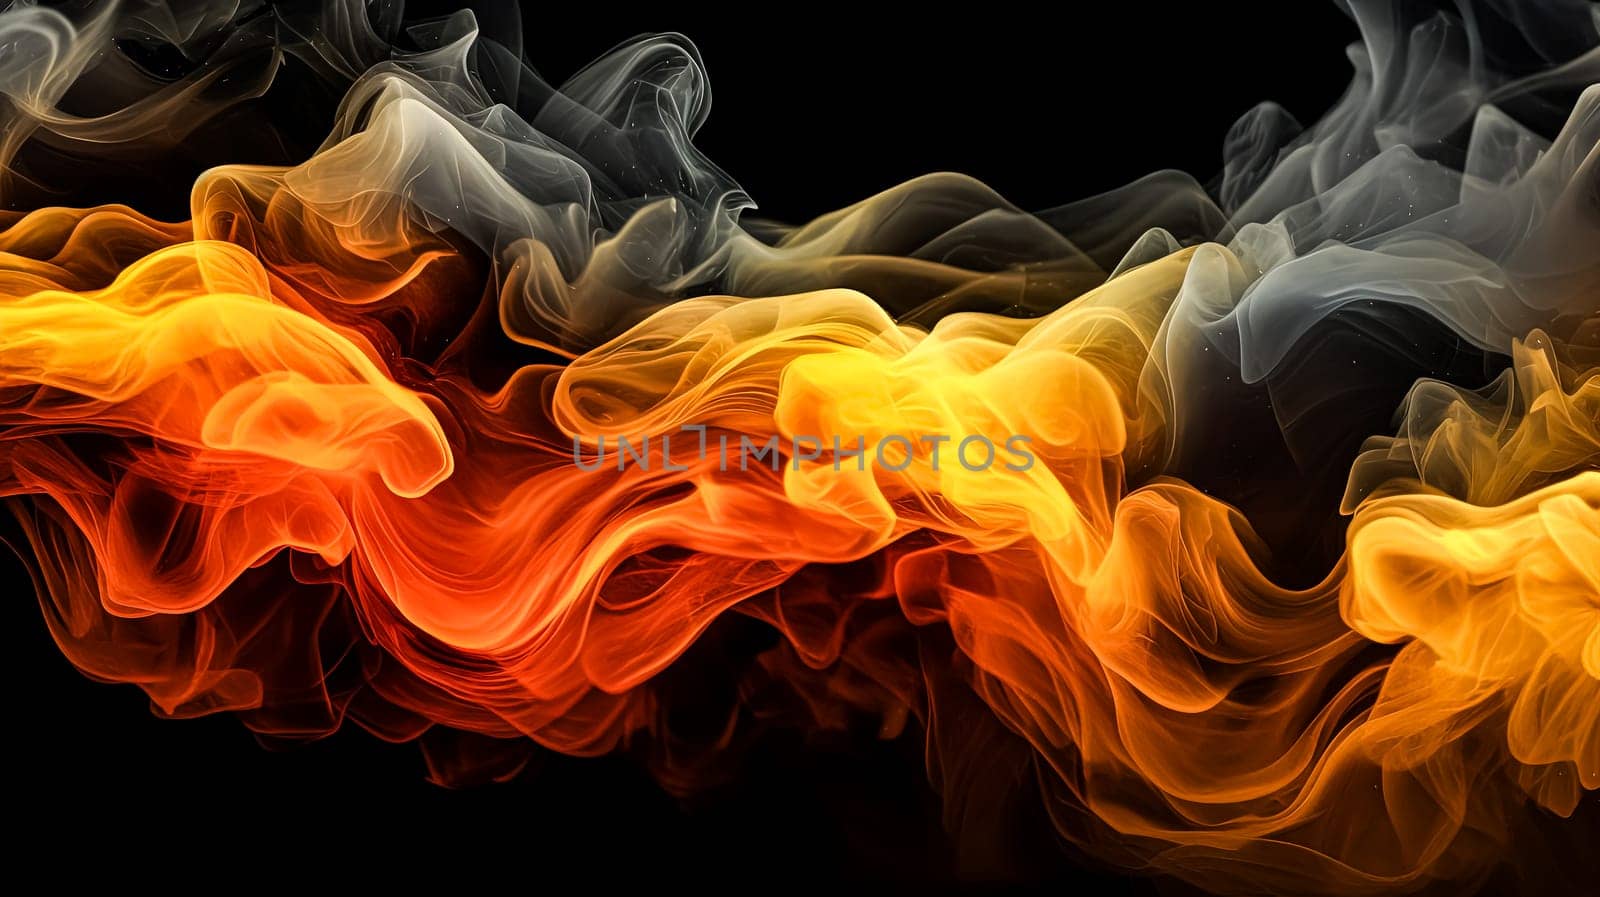 A colorful cloud of smoke with a blue, orange, and purple streak. The smoke is thick and billowing, creating a sense of movement and energy. The colors of the smoke contrast with the dark background